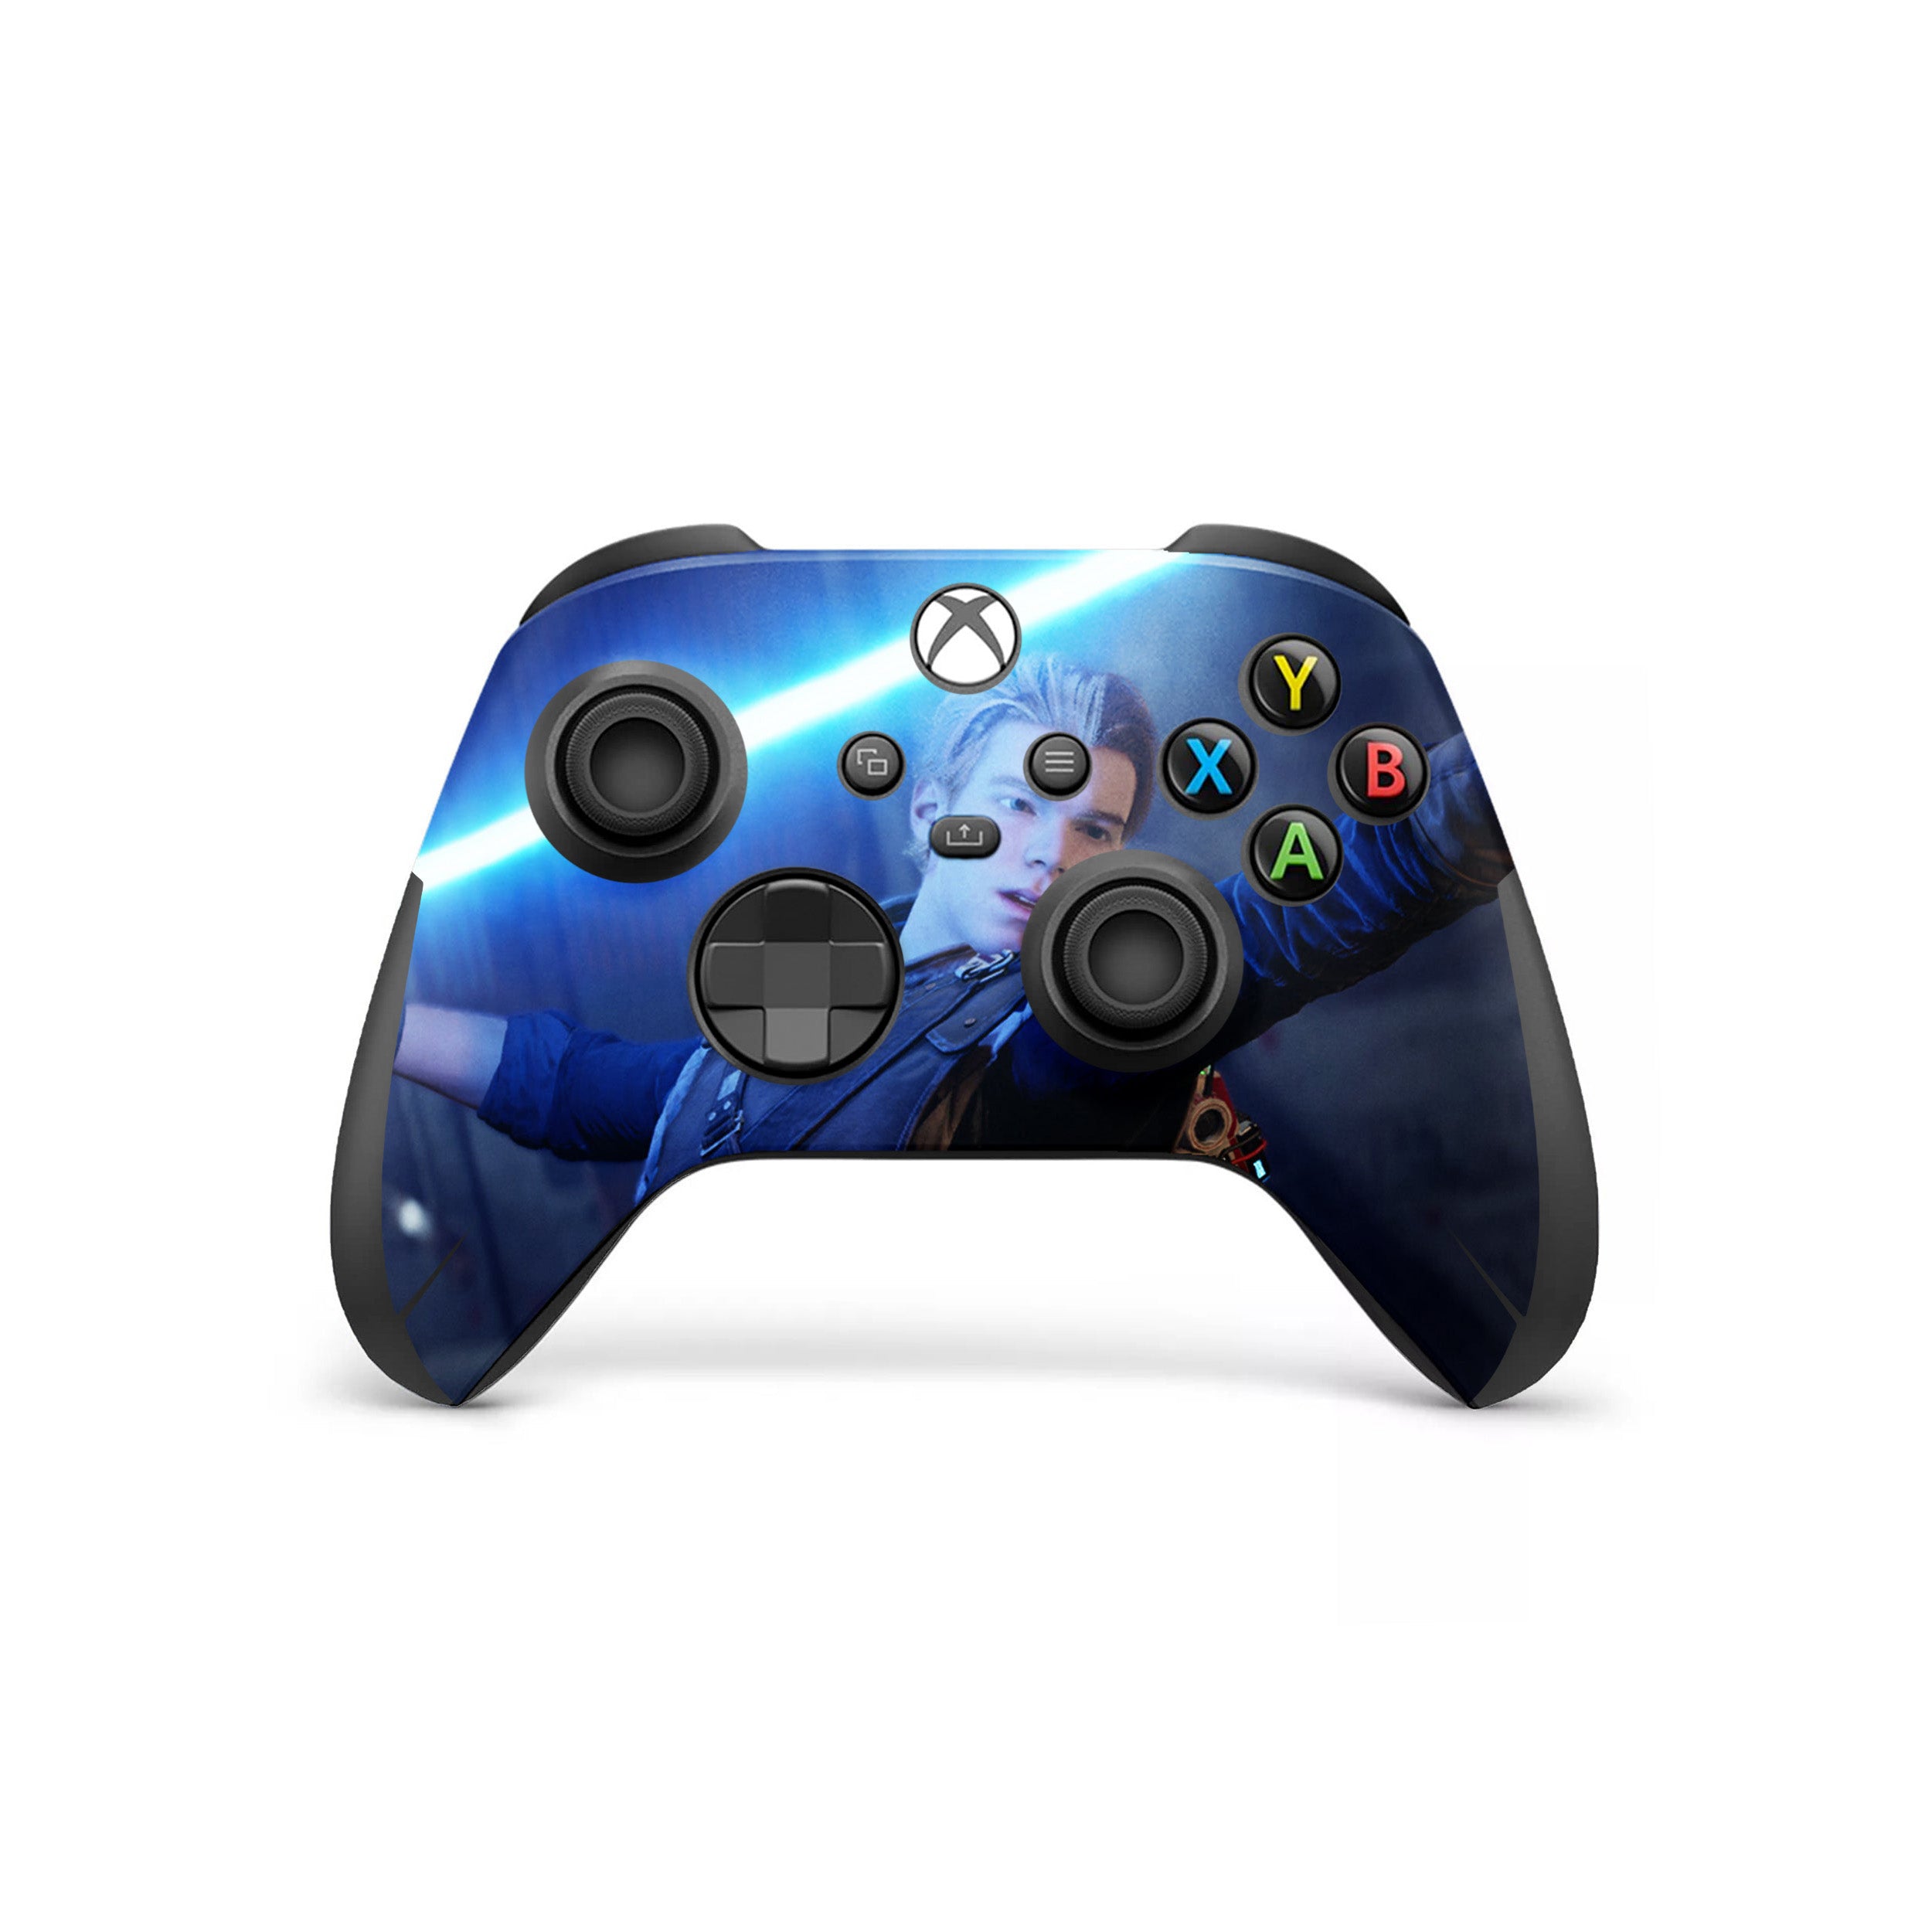 A video game skin featuring a Star Wars Jedi Fallen Order design for the Xbox Wireless Controller.